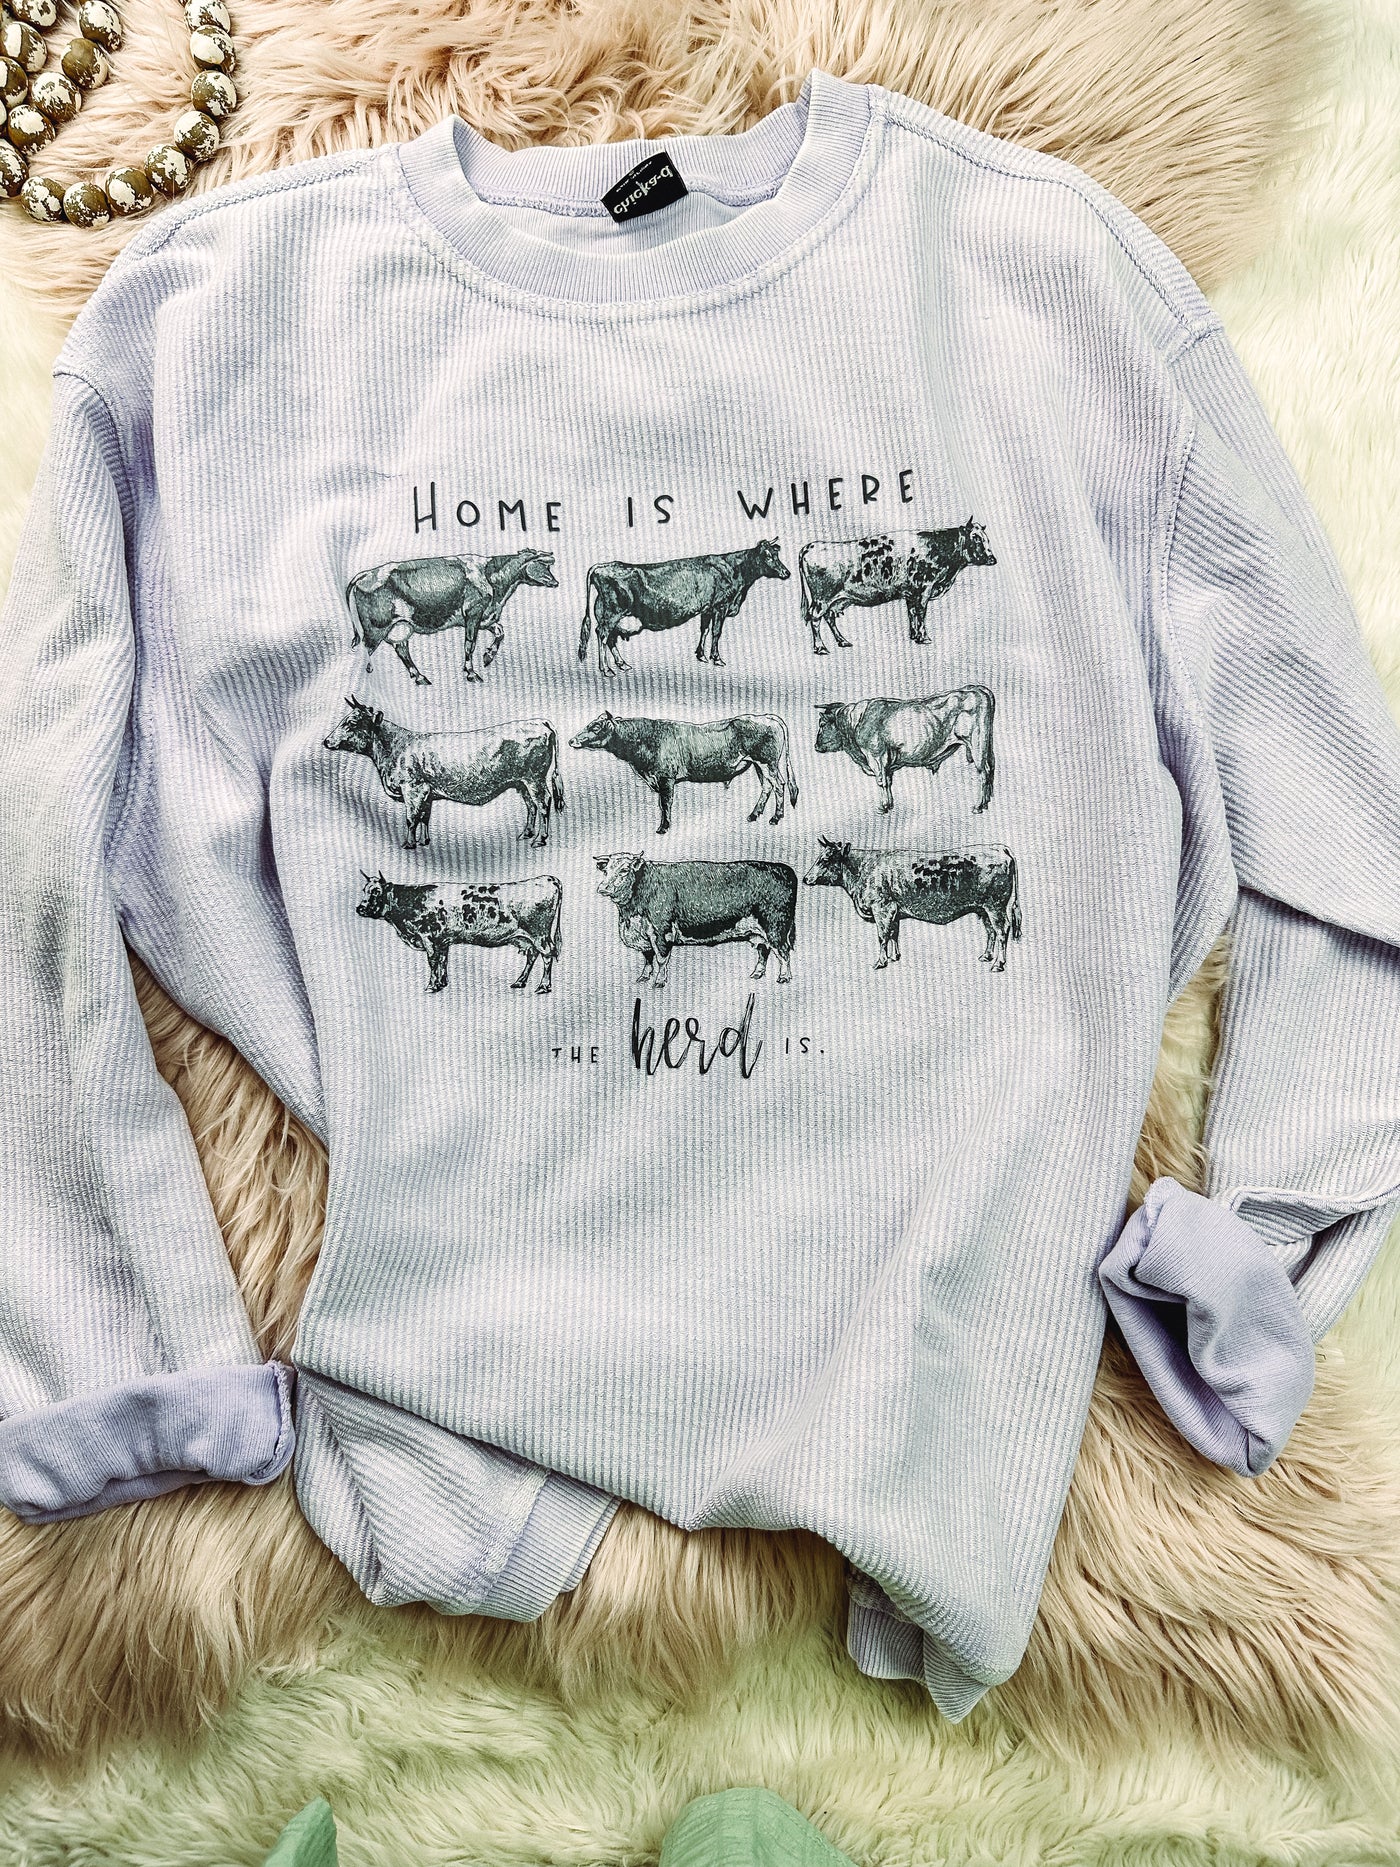 Where the Herd Is - Corded Sweater-Adelyn Elaine's-Adelyn Elaine's Boutique, Women's Clothing Boutique in Gilmer, TX